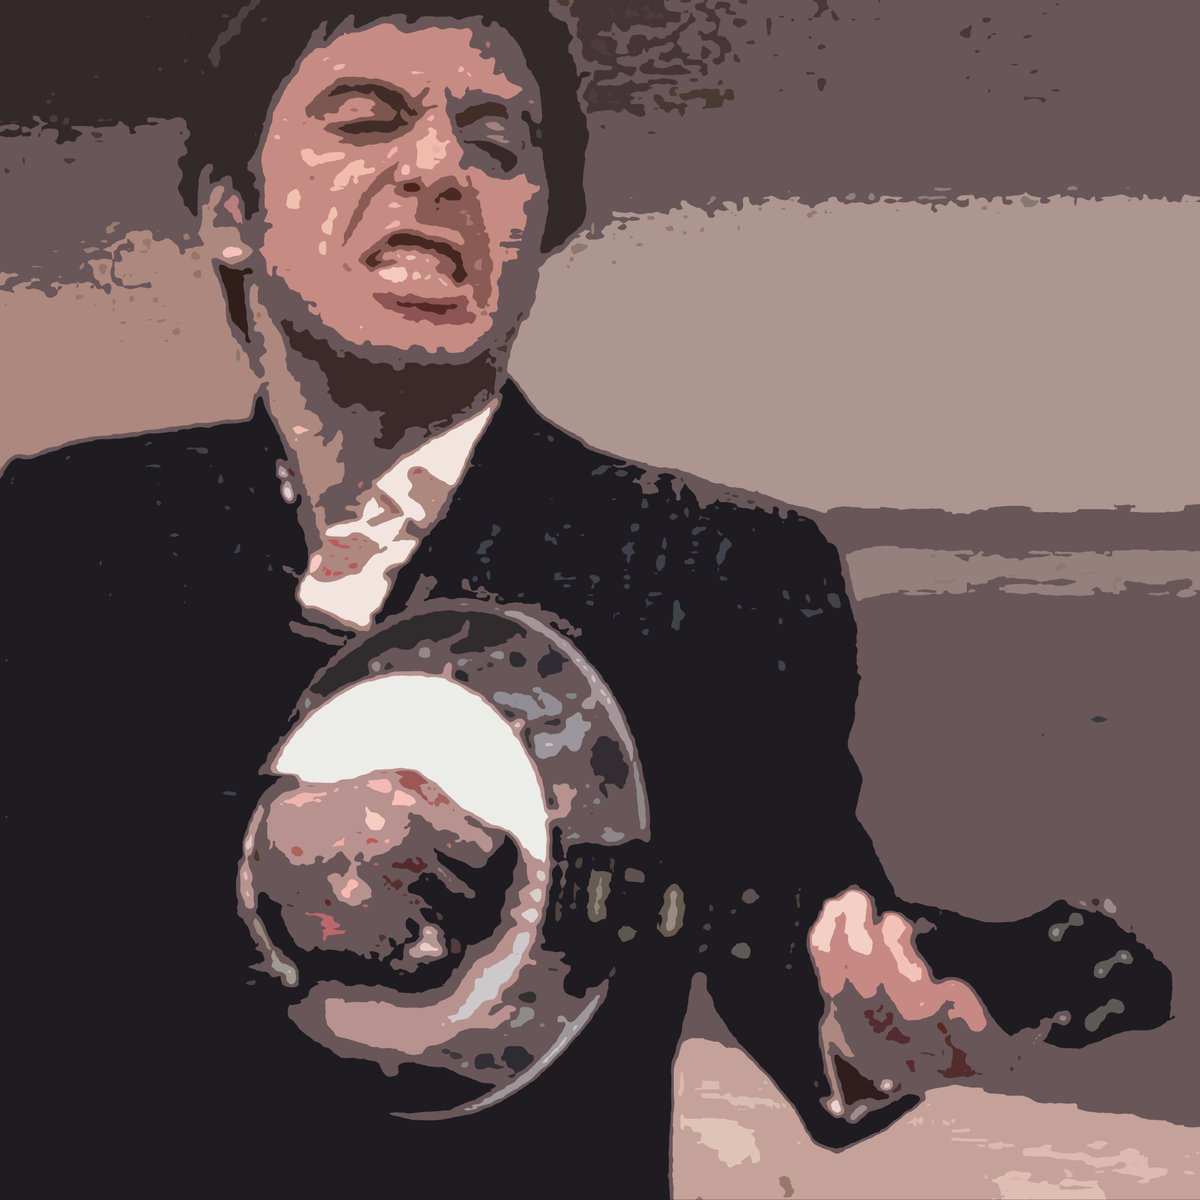 redbubble.com/people/unclest… #Scarface #BanjoLife #Music #parody #funny #redbubble